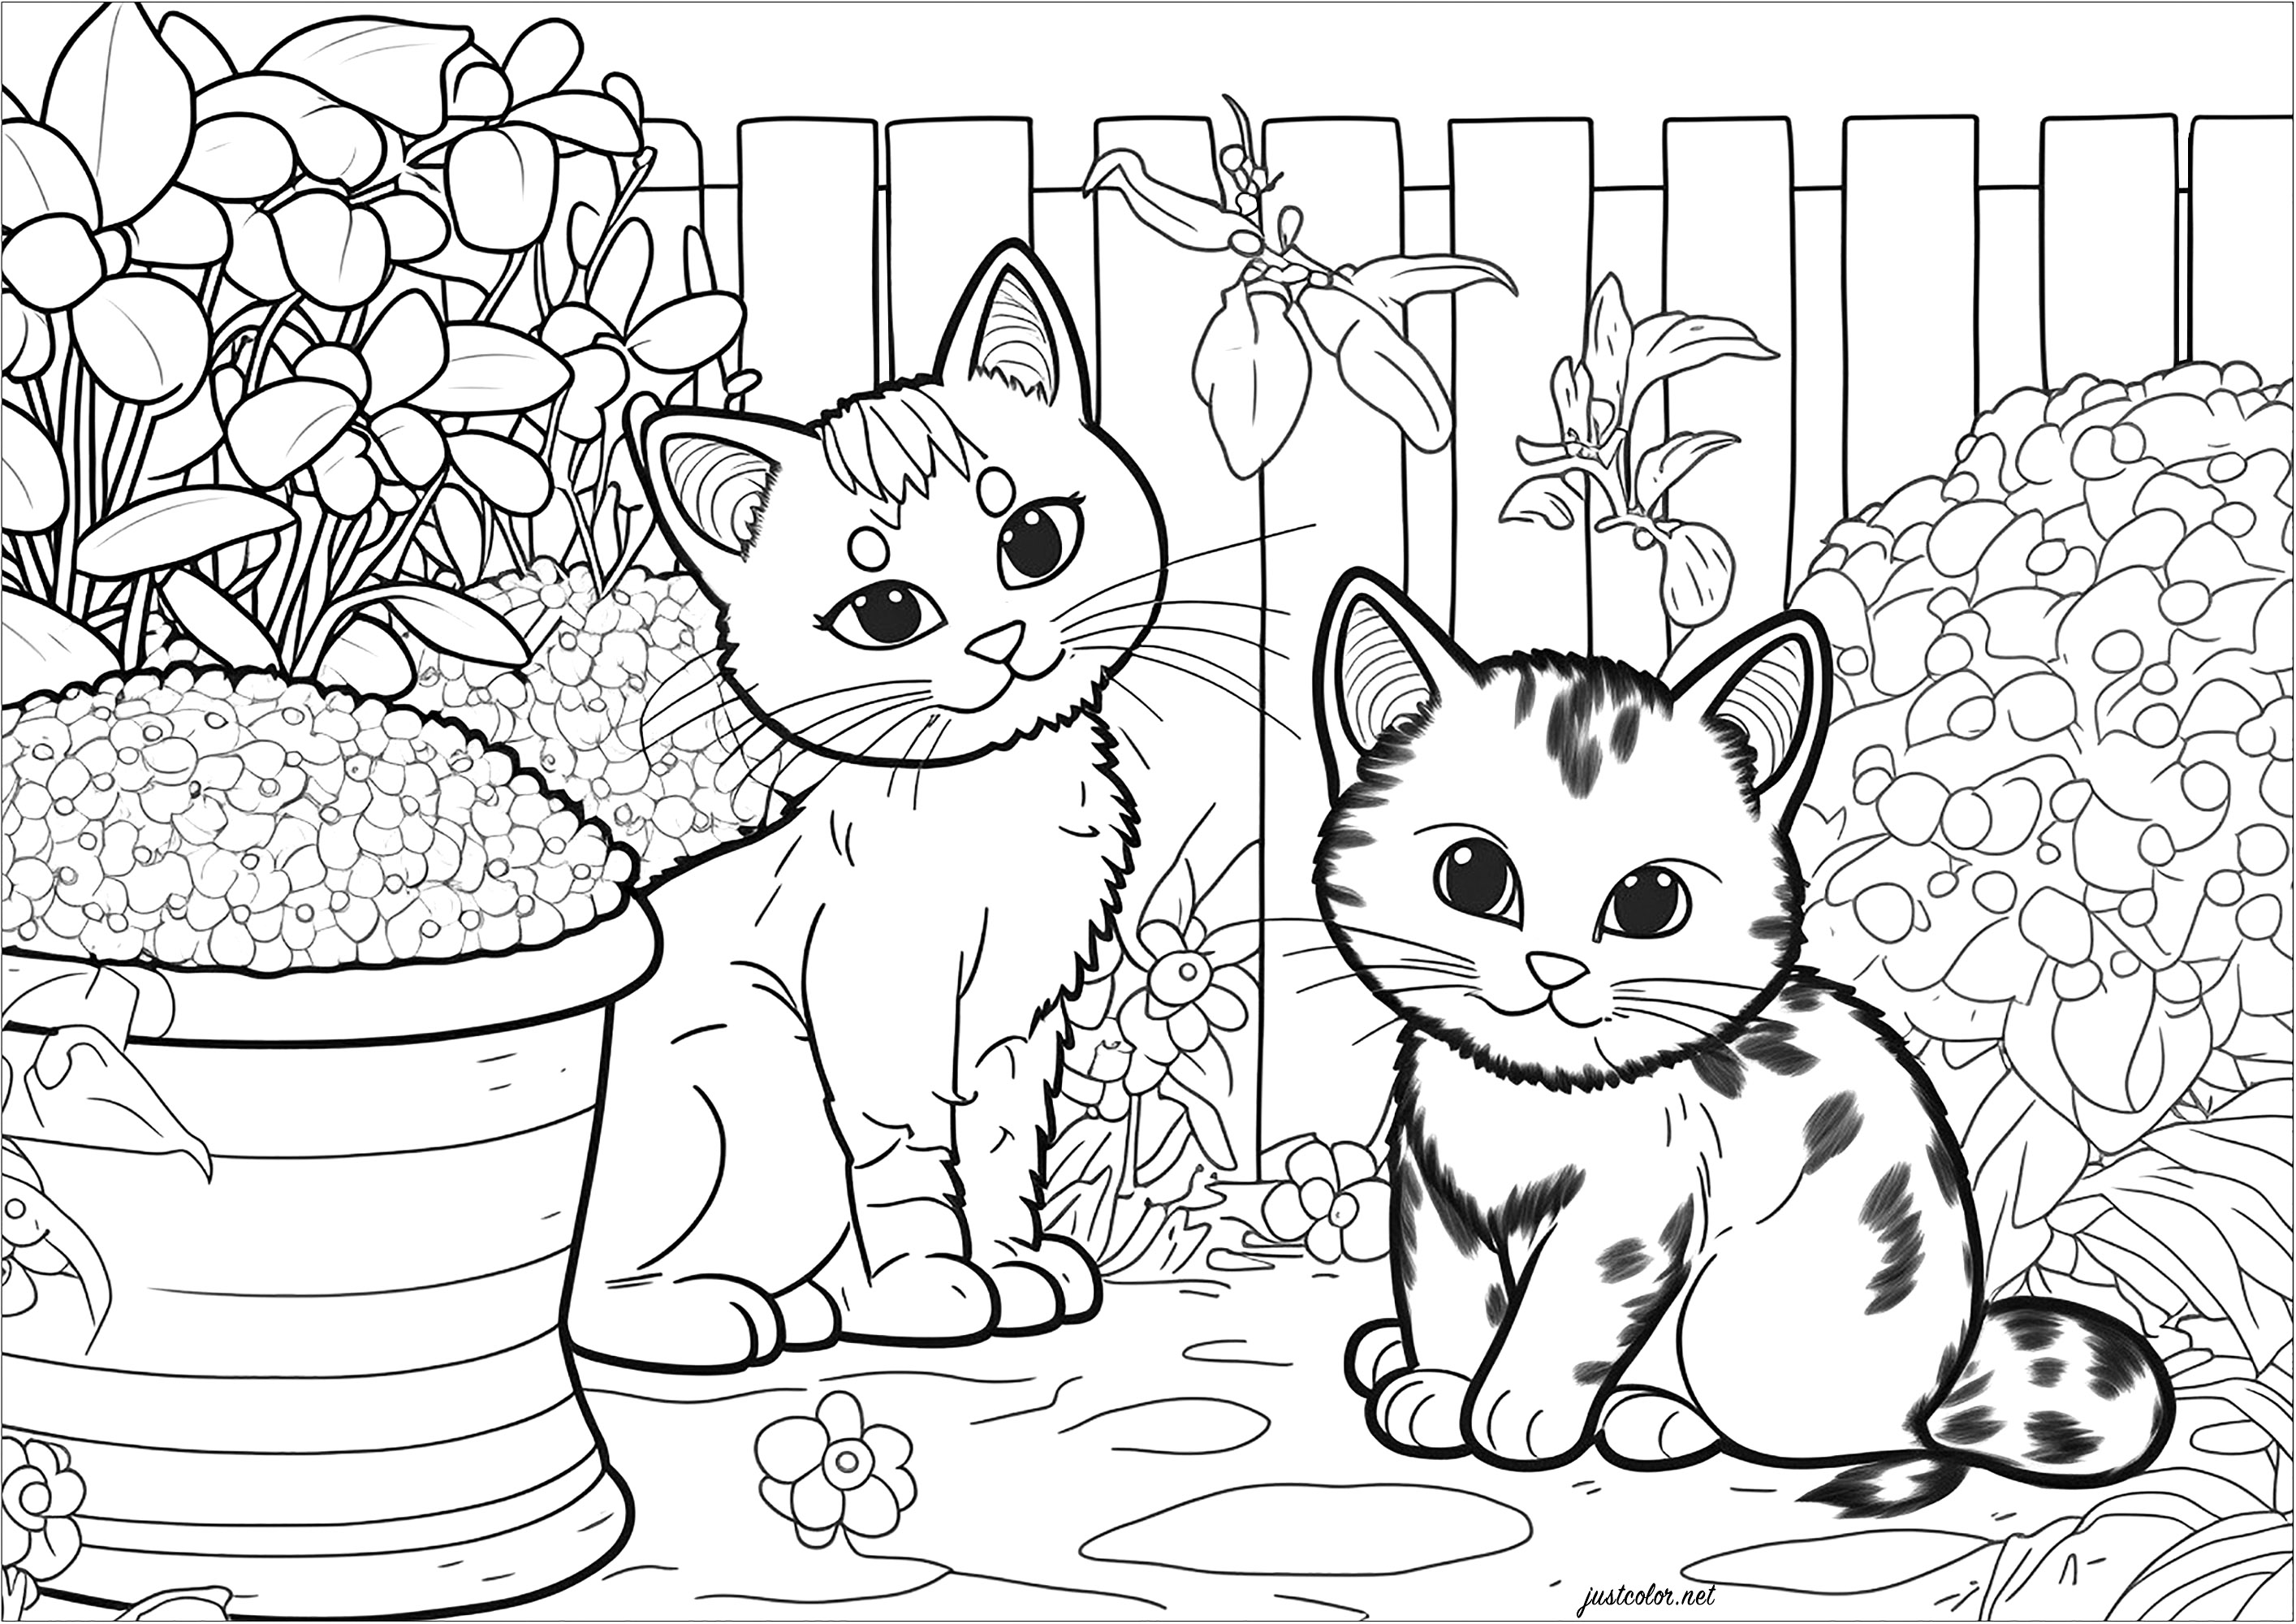 Two little cats in the garden to color. This coloring page is both cute and relaxing. It depicts two little cats playing in a garden. The cats are surrounded by a variety of plant elements, such as flowers, bushes, trees and grasses. It's a great way to escape into a world of color and nature.